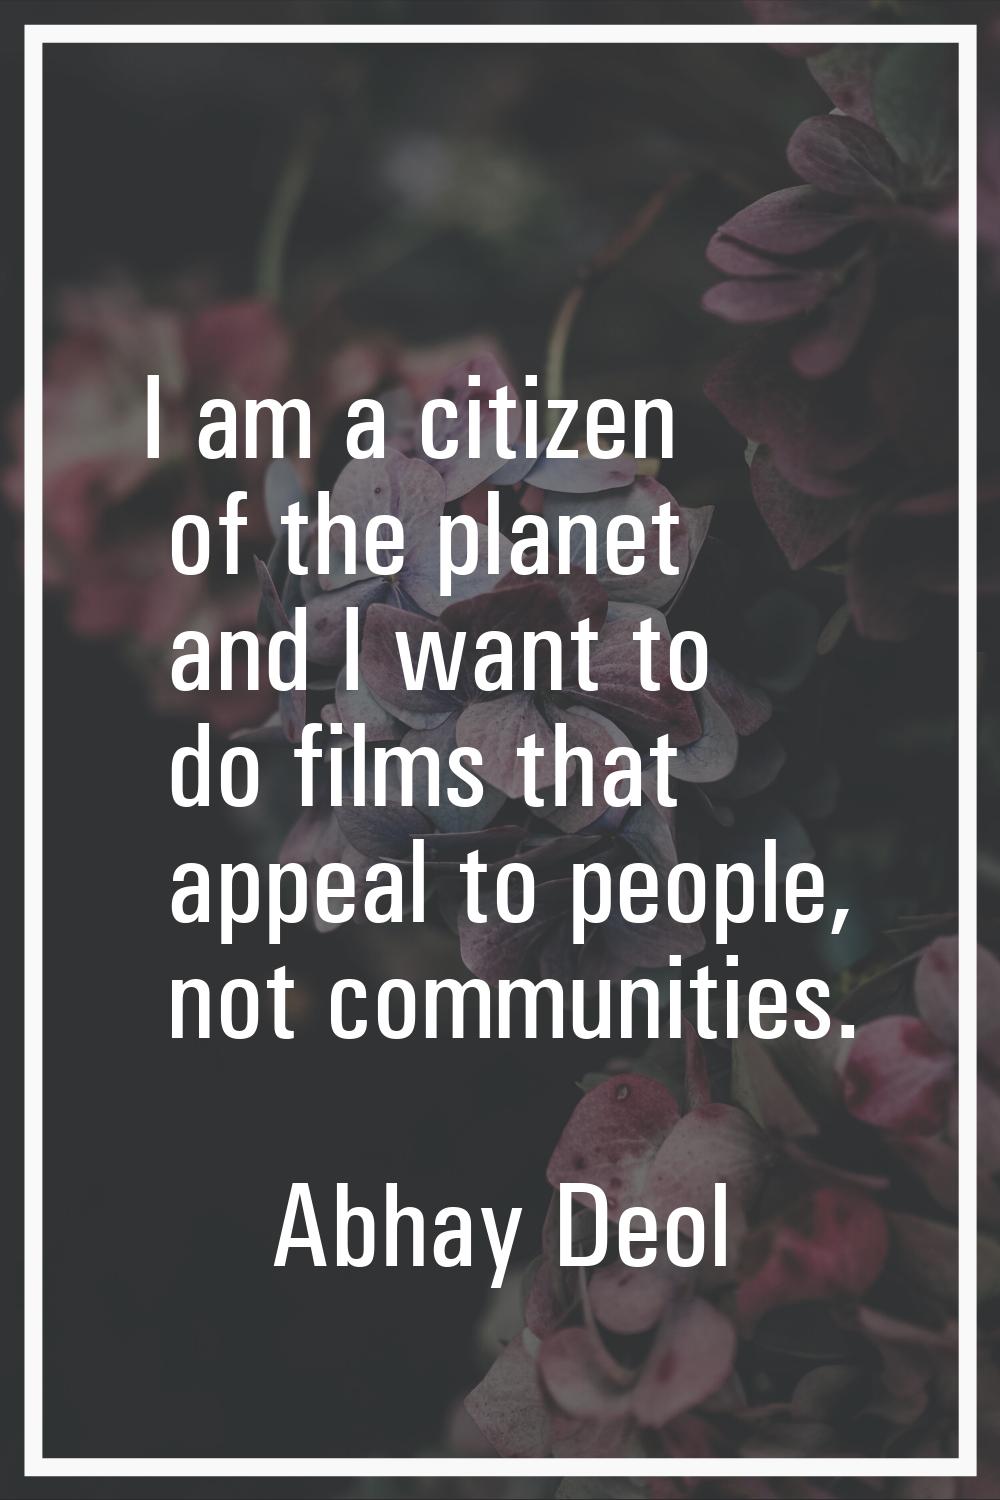 I am a citizen of the planet and I want to do films that appeal to people, not communities.